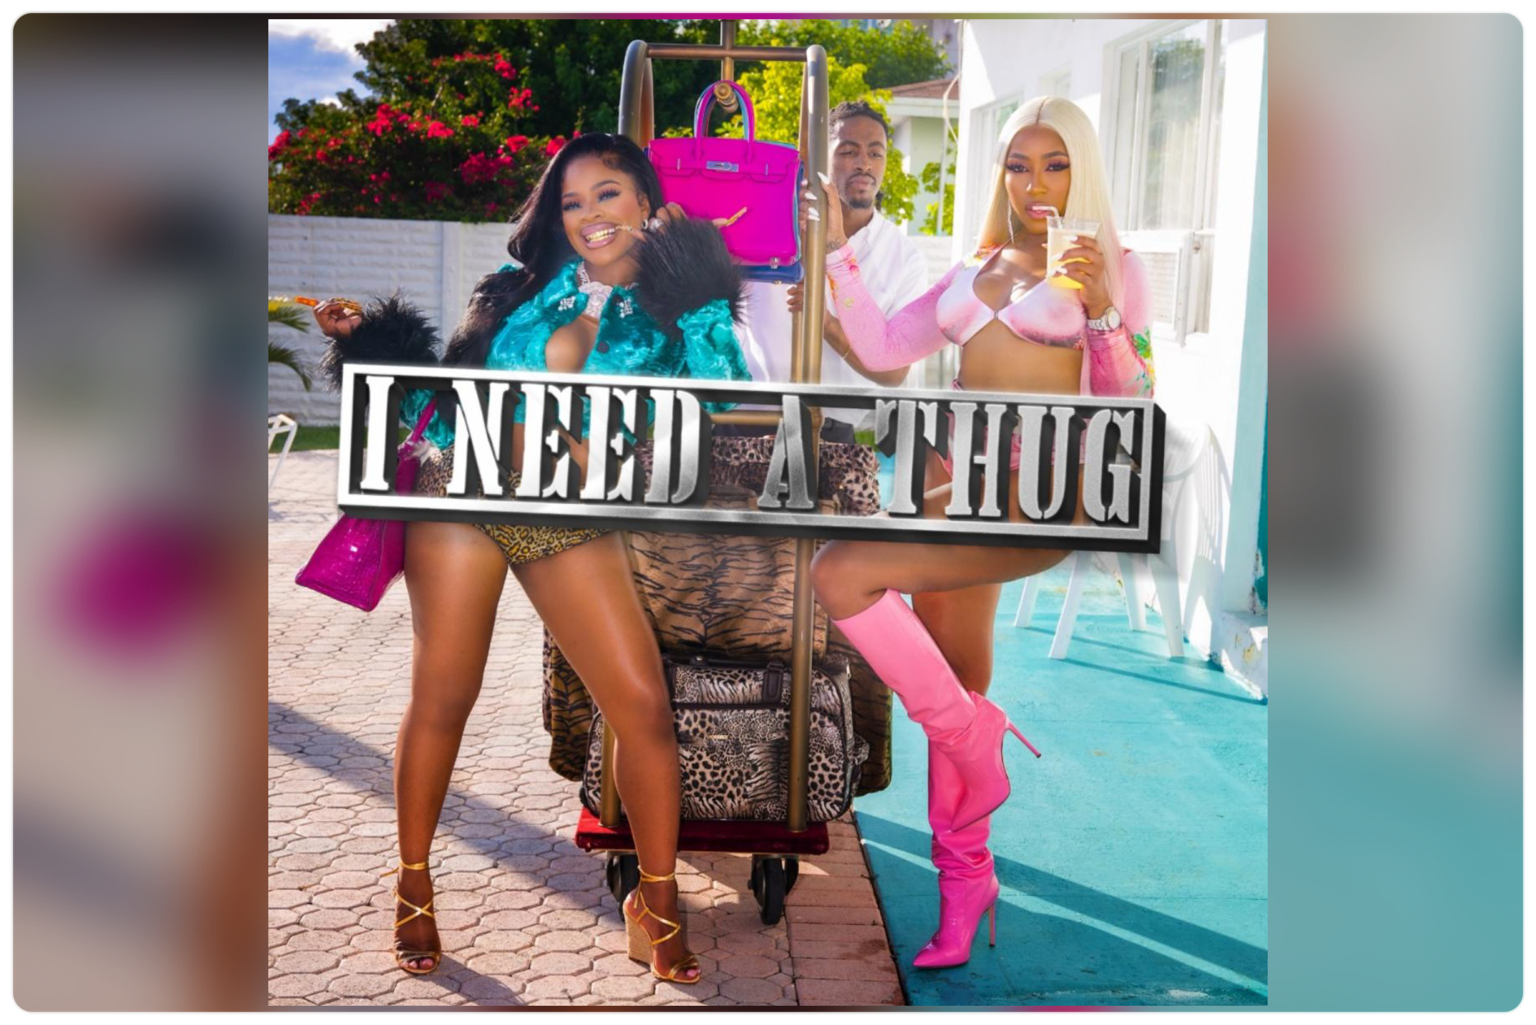 City Girls' release twist on LL Cool J classic with new single 'I Need a  Thug' - Bayou Beat News